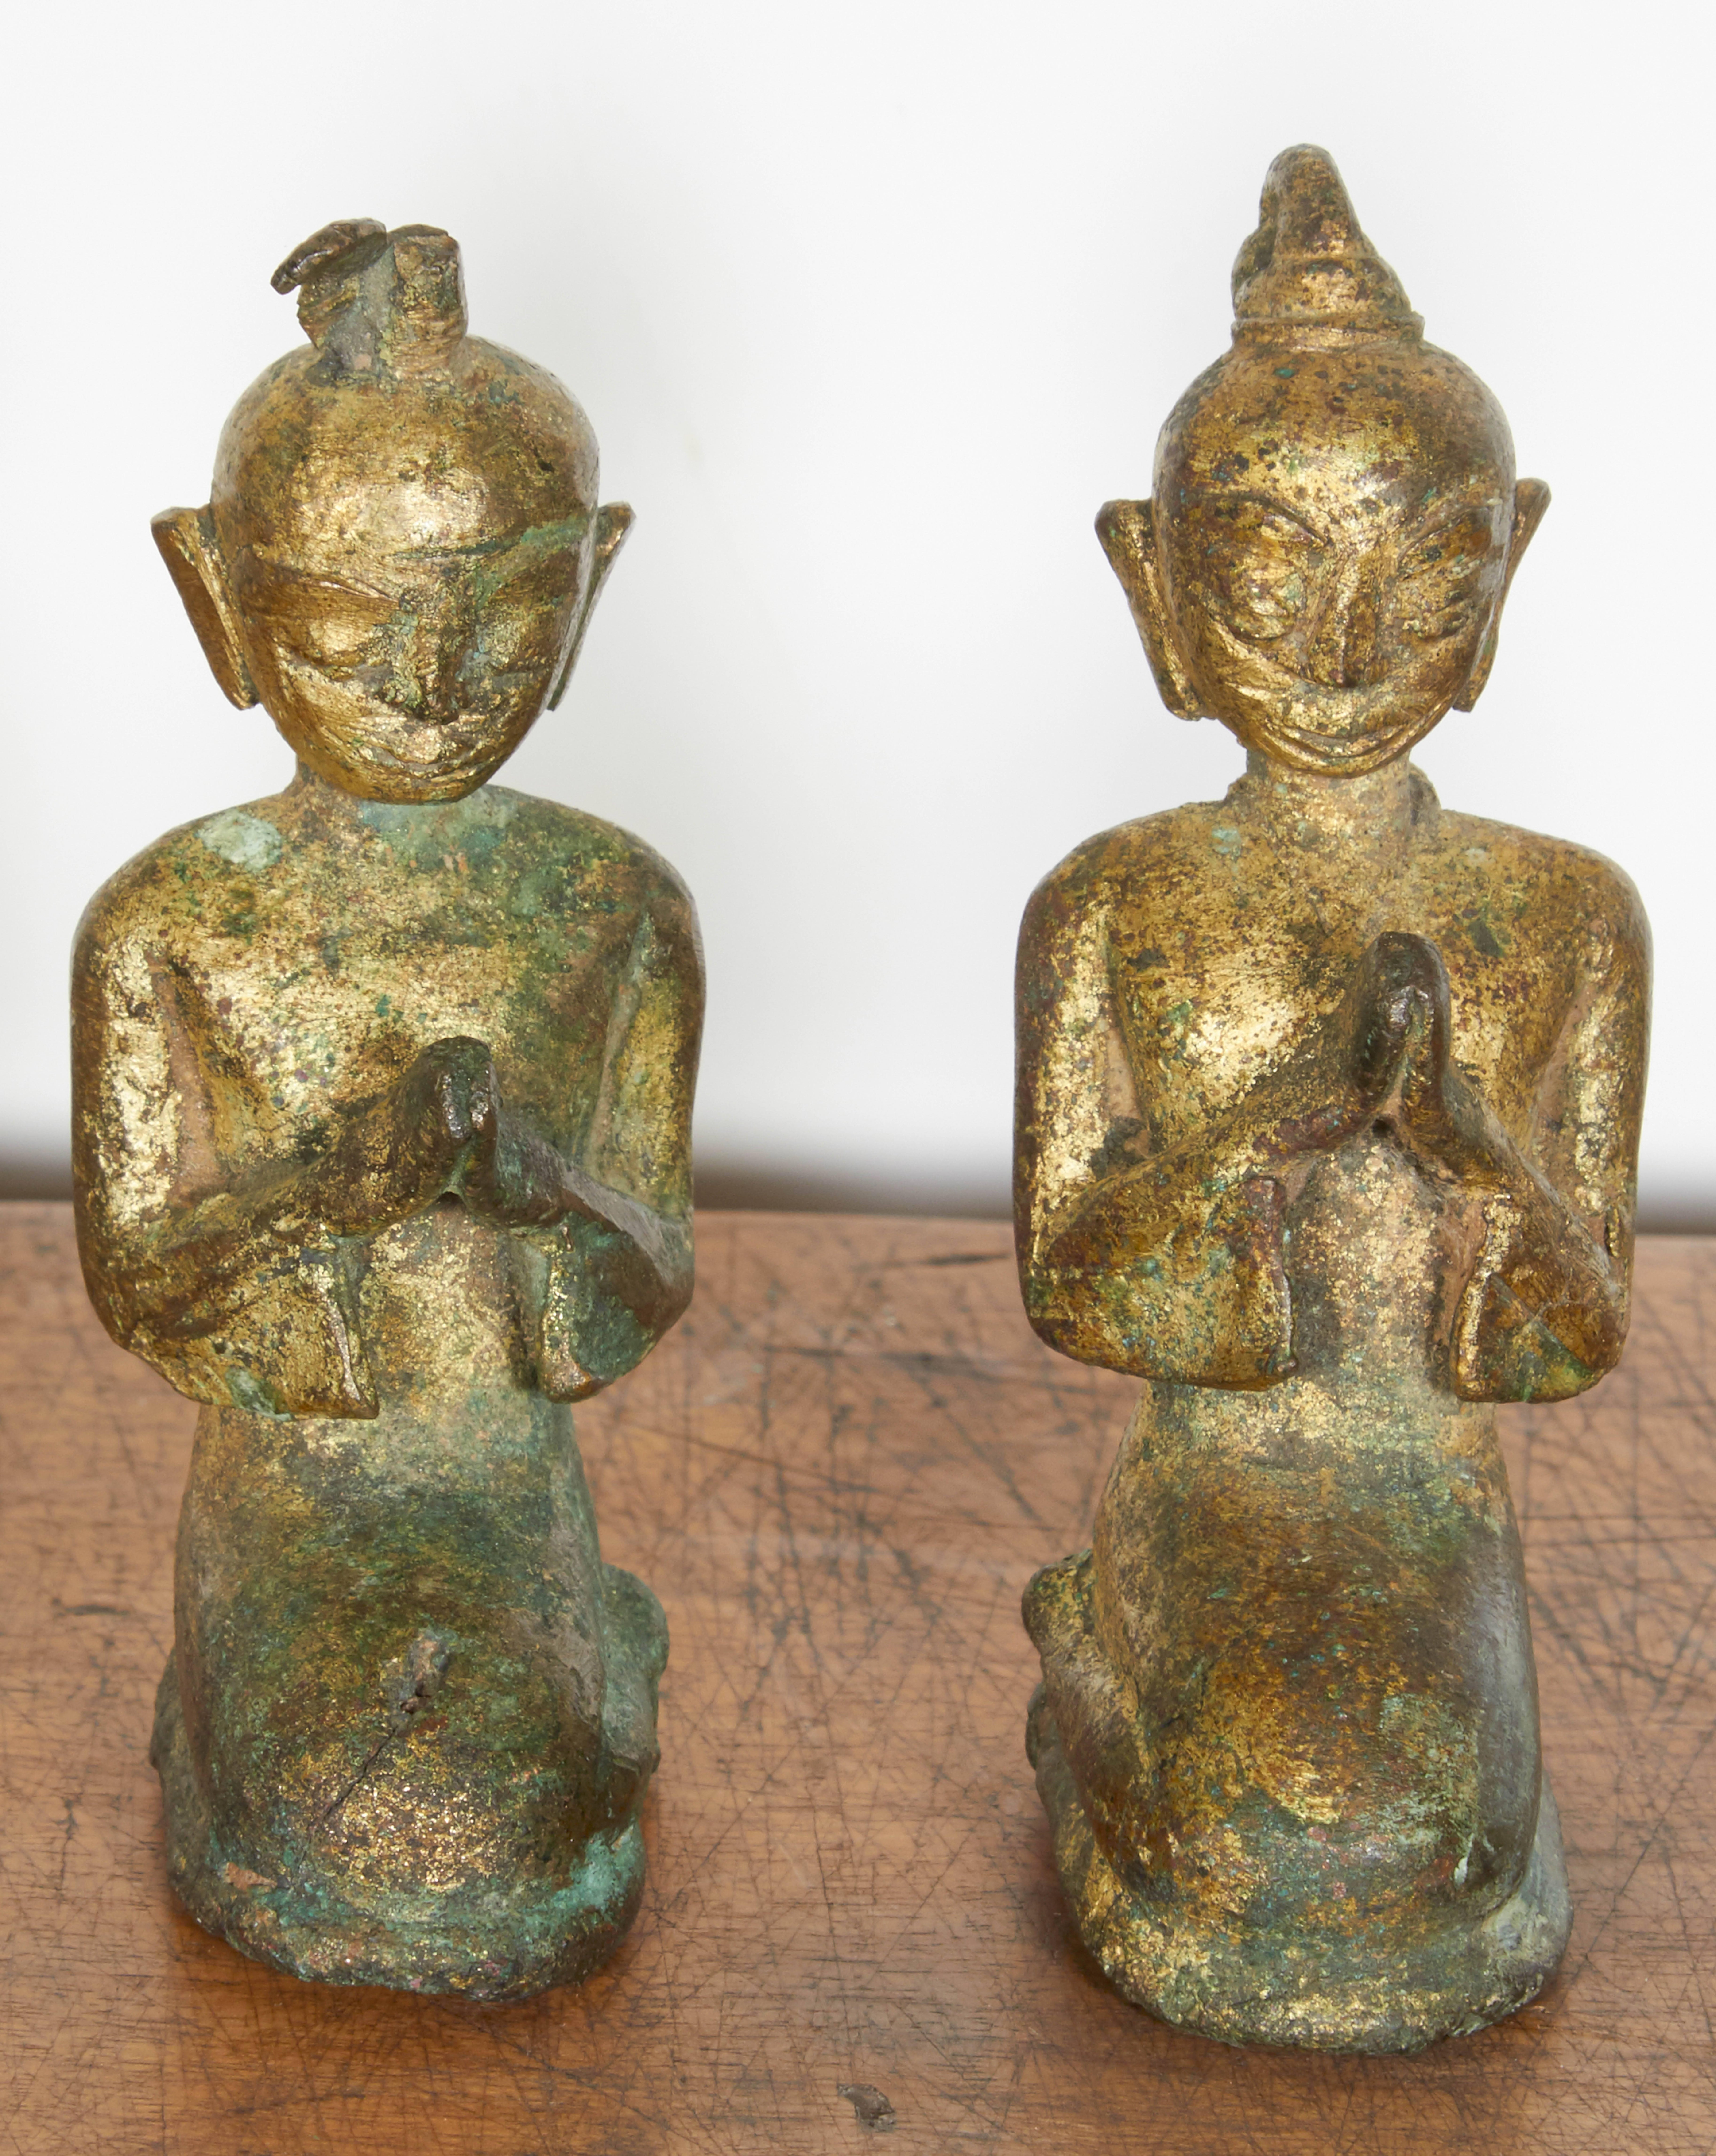 A sensitively cast pair of highly detailed 19th century Thai miniature bronze kneeling monks in the position of prayer. These monks exhibit a particularly beautiful color and patina. Each has a wonderful soothing presence and a lovely sweet smile.